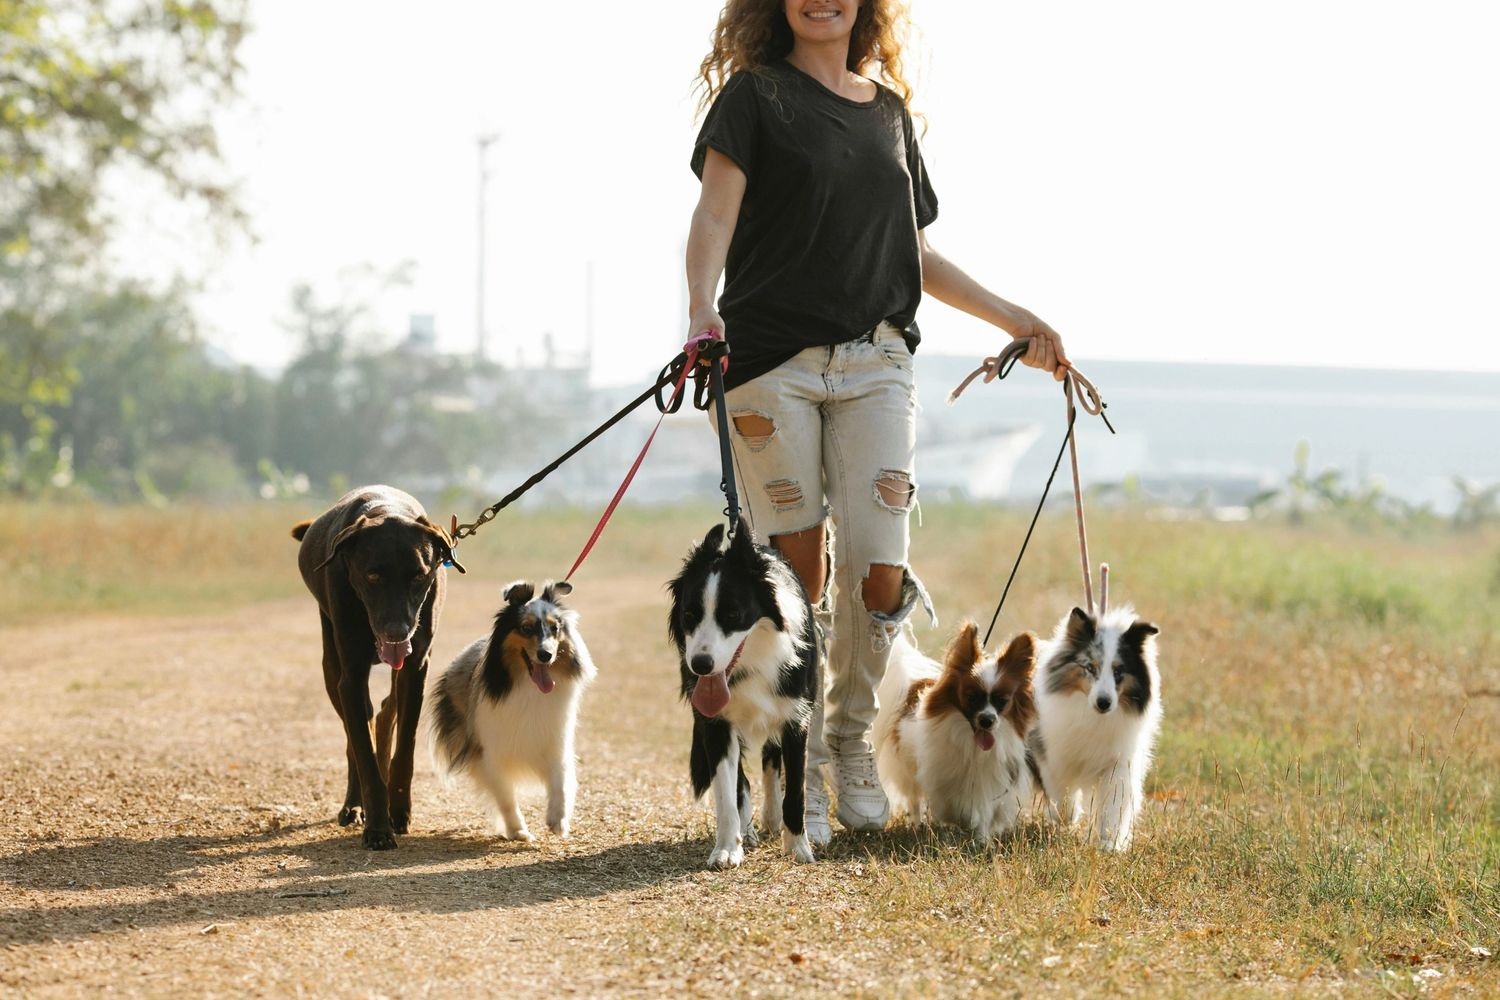 Woman walking 5 dogs at once. You can’t see her face. 